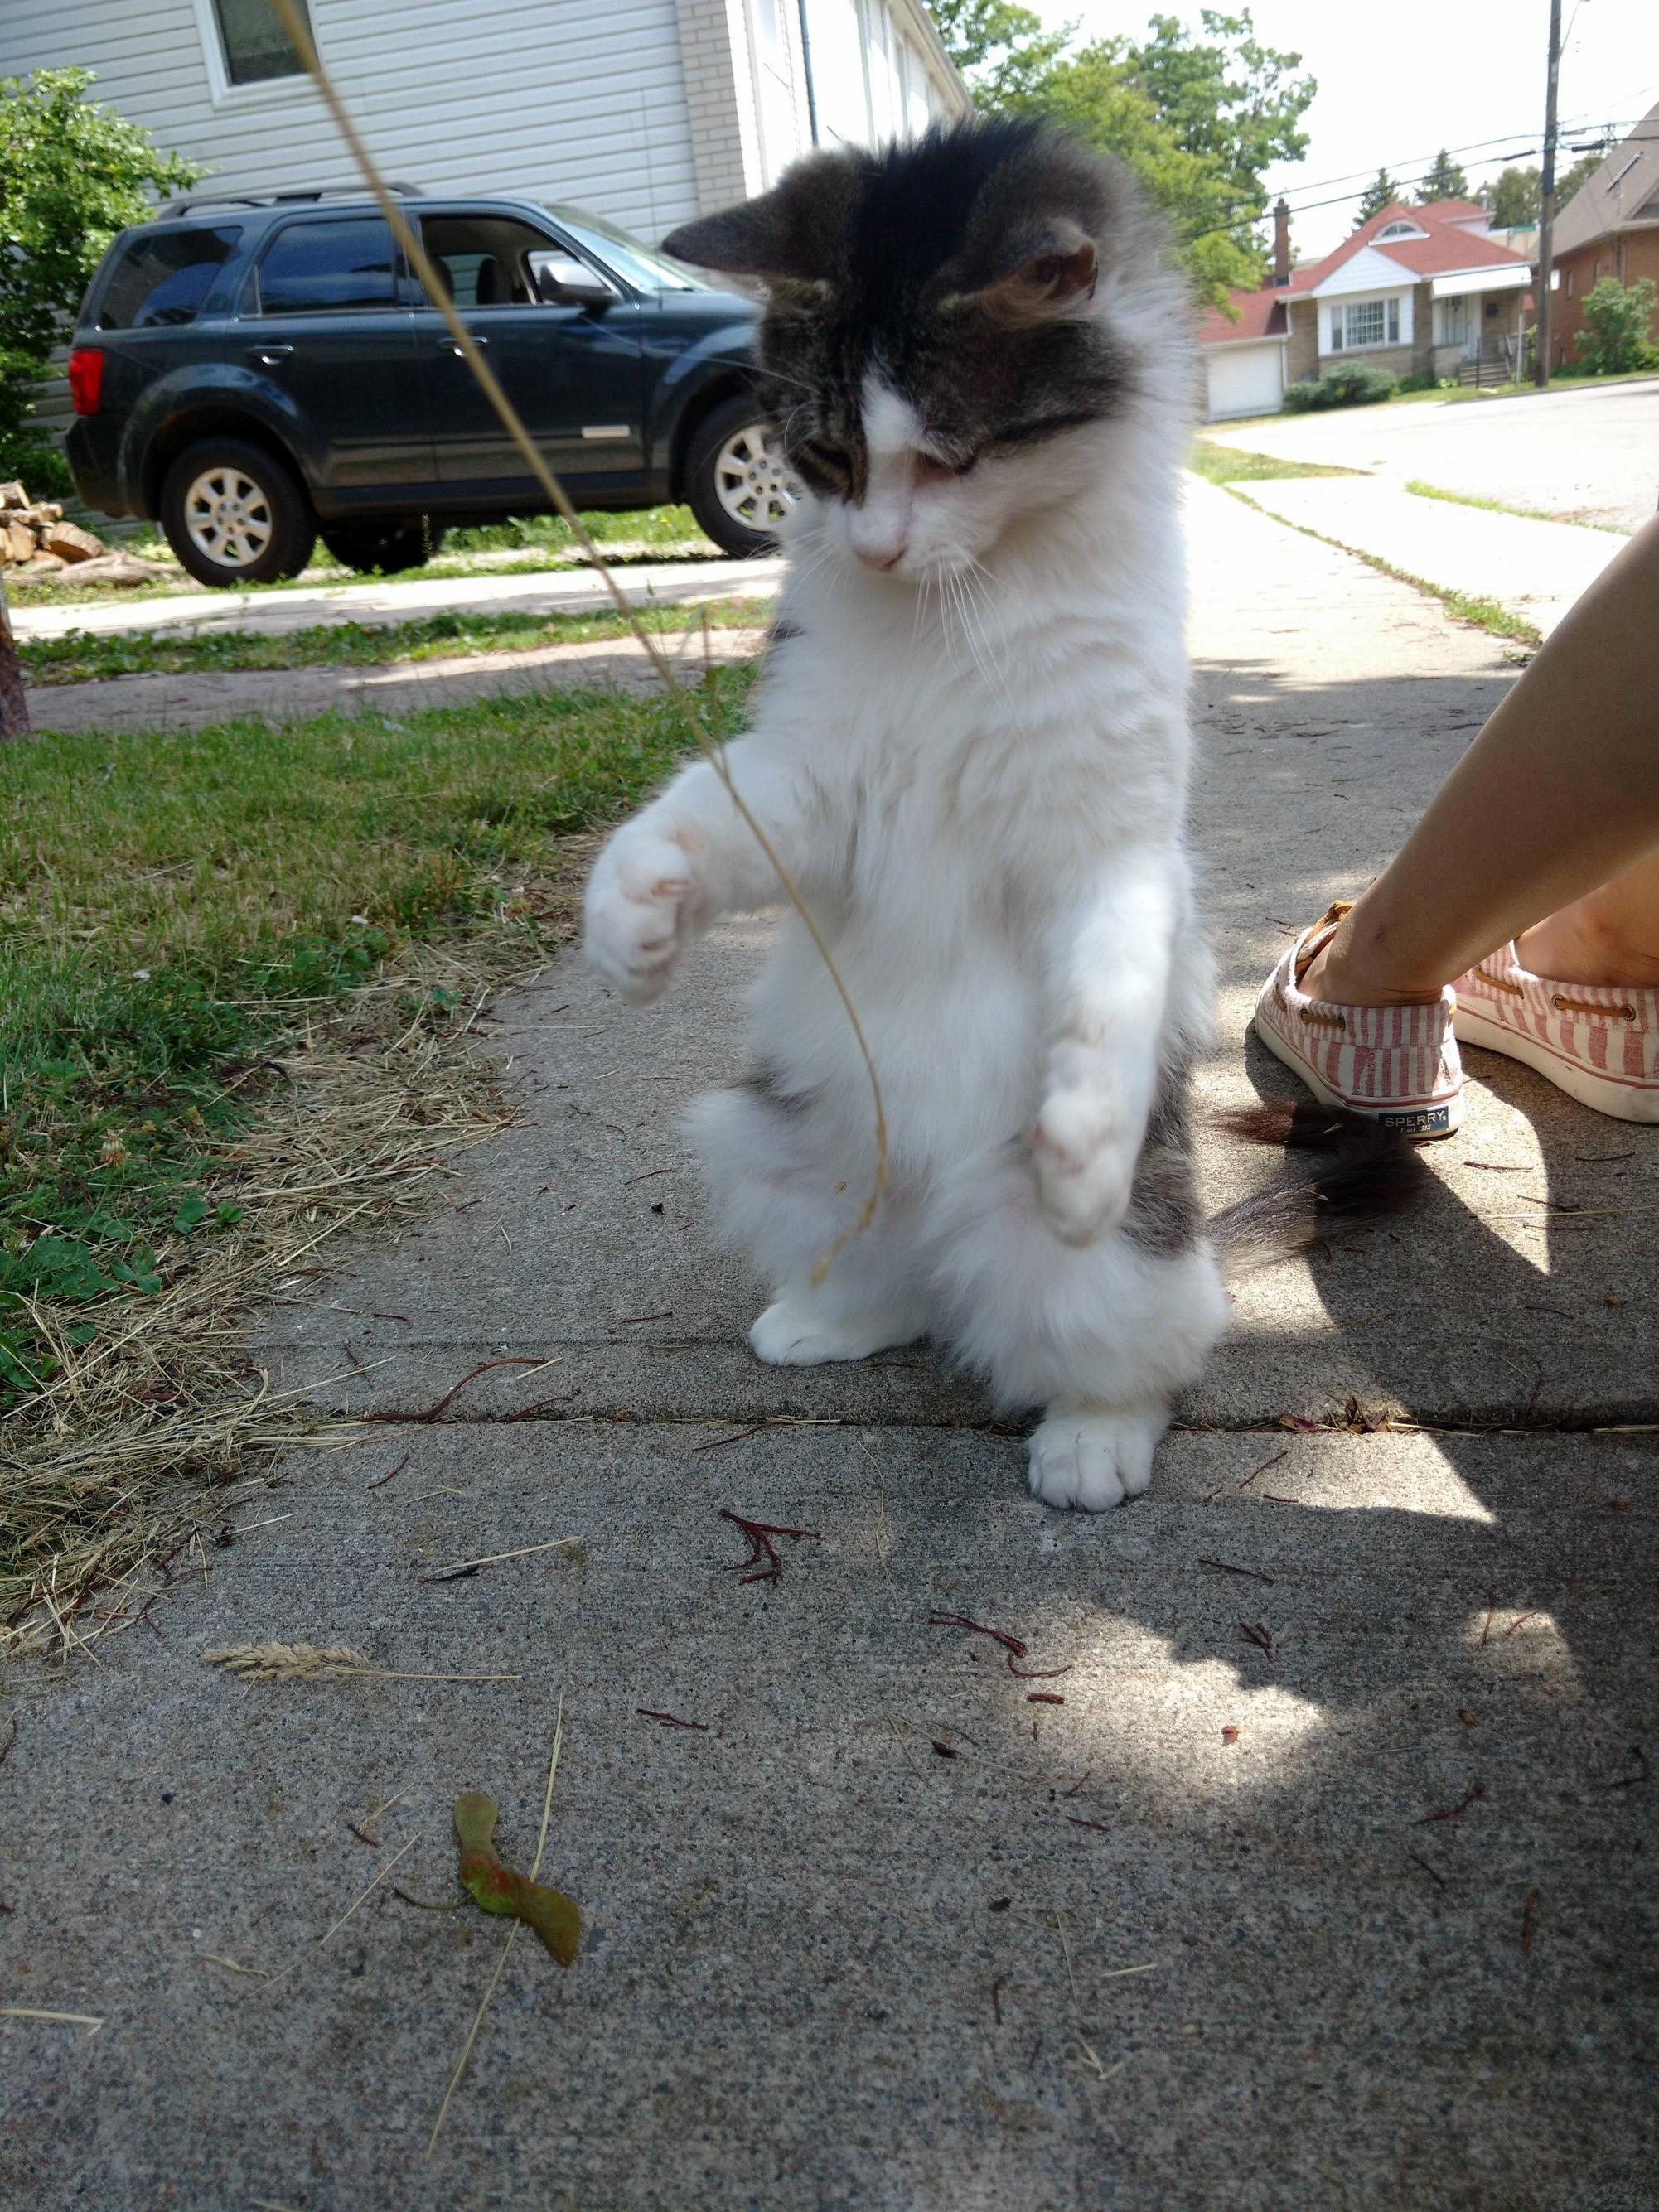 This is scrappycat. shes a pal from my neighborhood